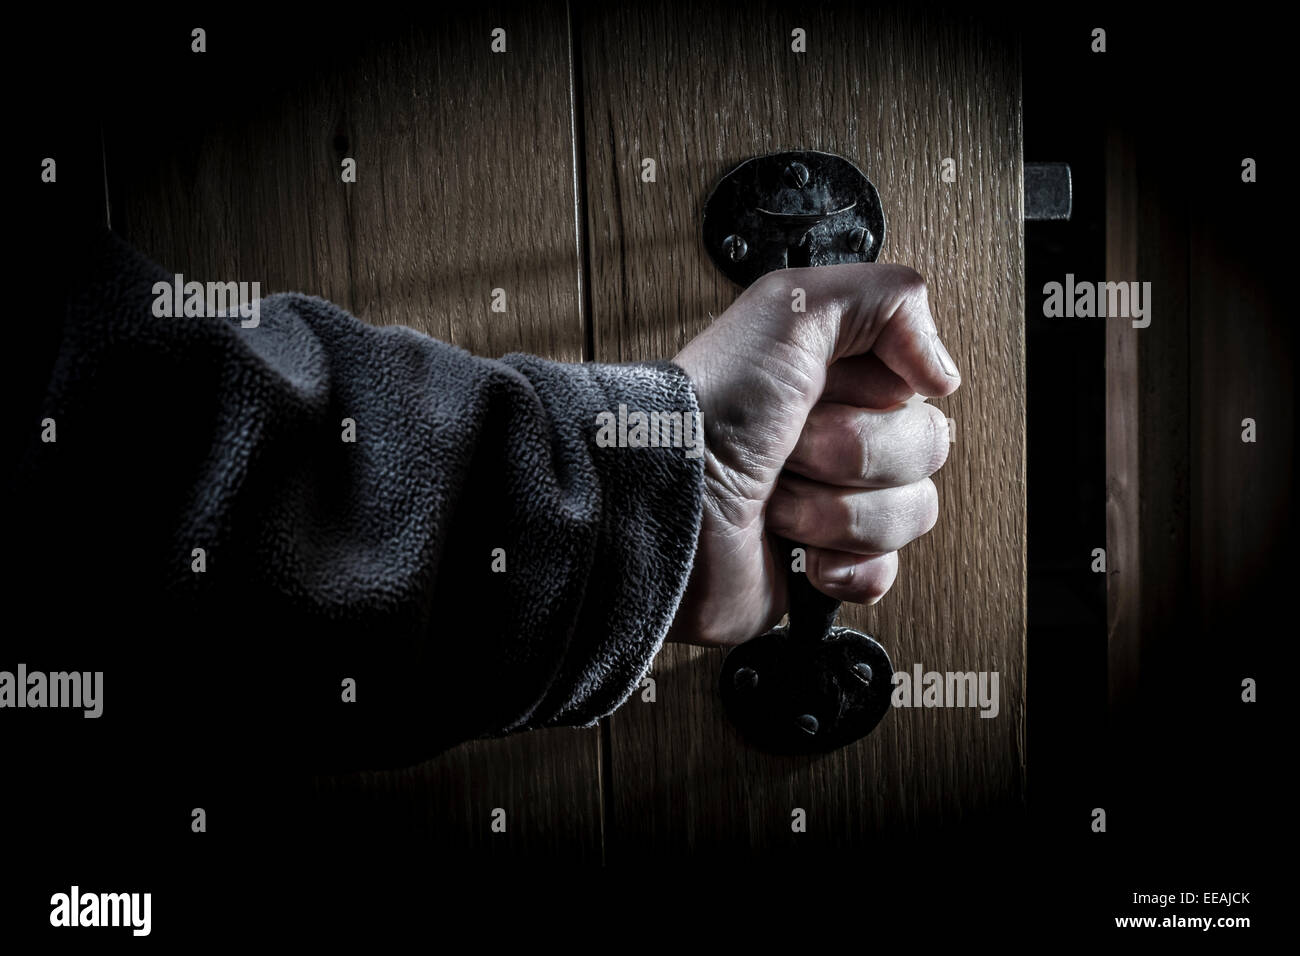 A man's hand opening a door into a dark room. Stock Photo